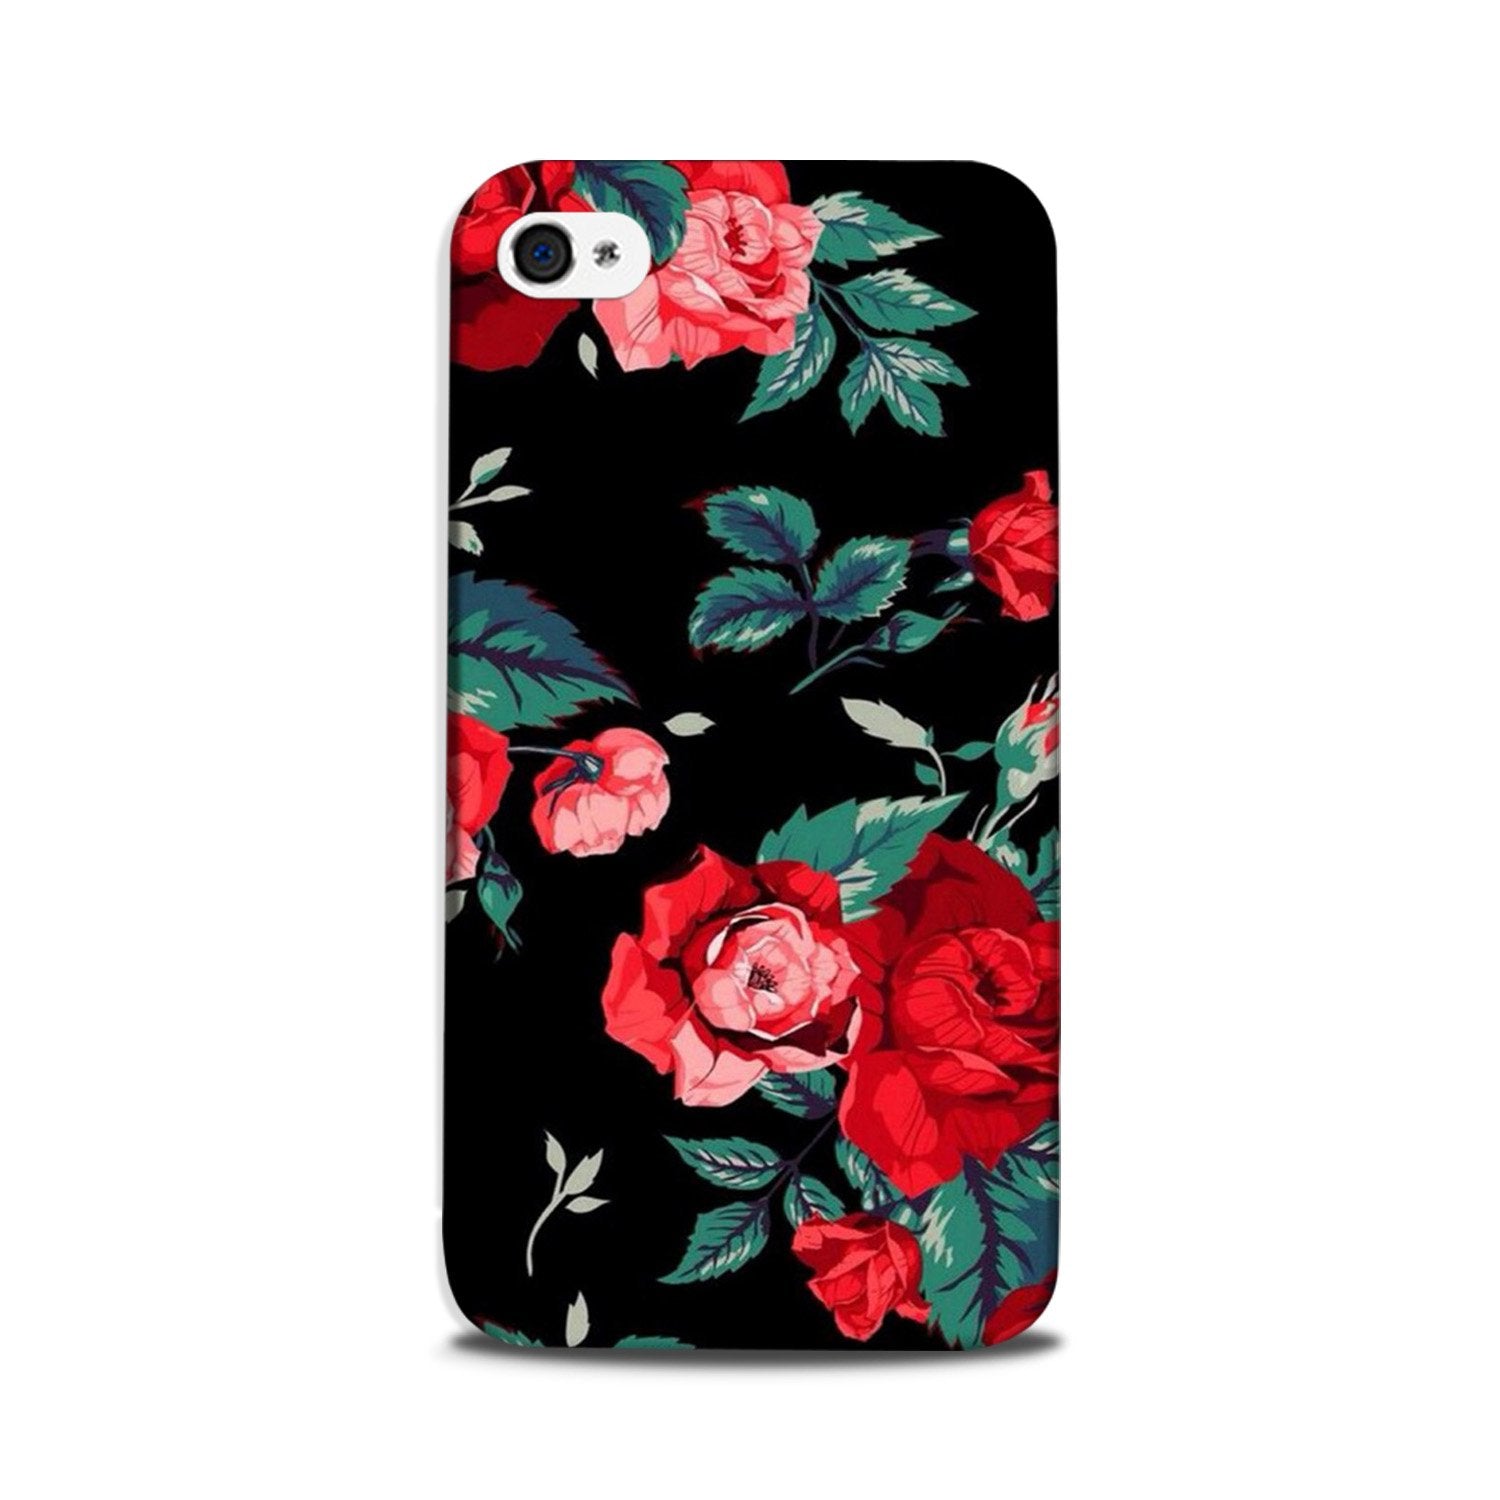 Red Rose2 Case for iPhone 5/ 5s